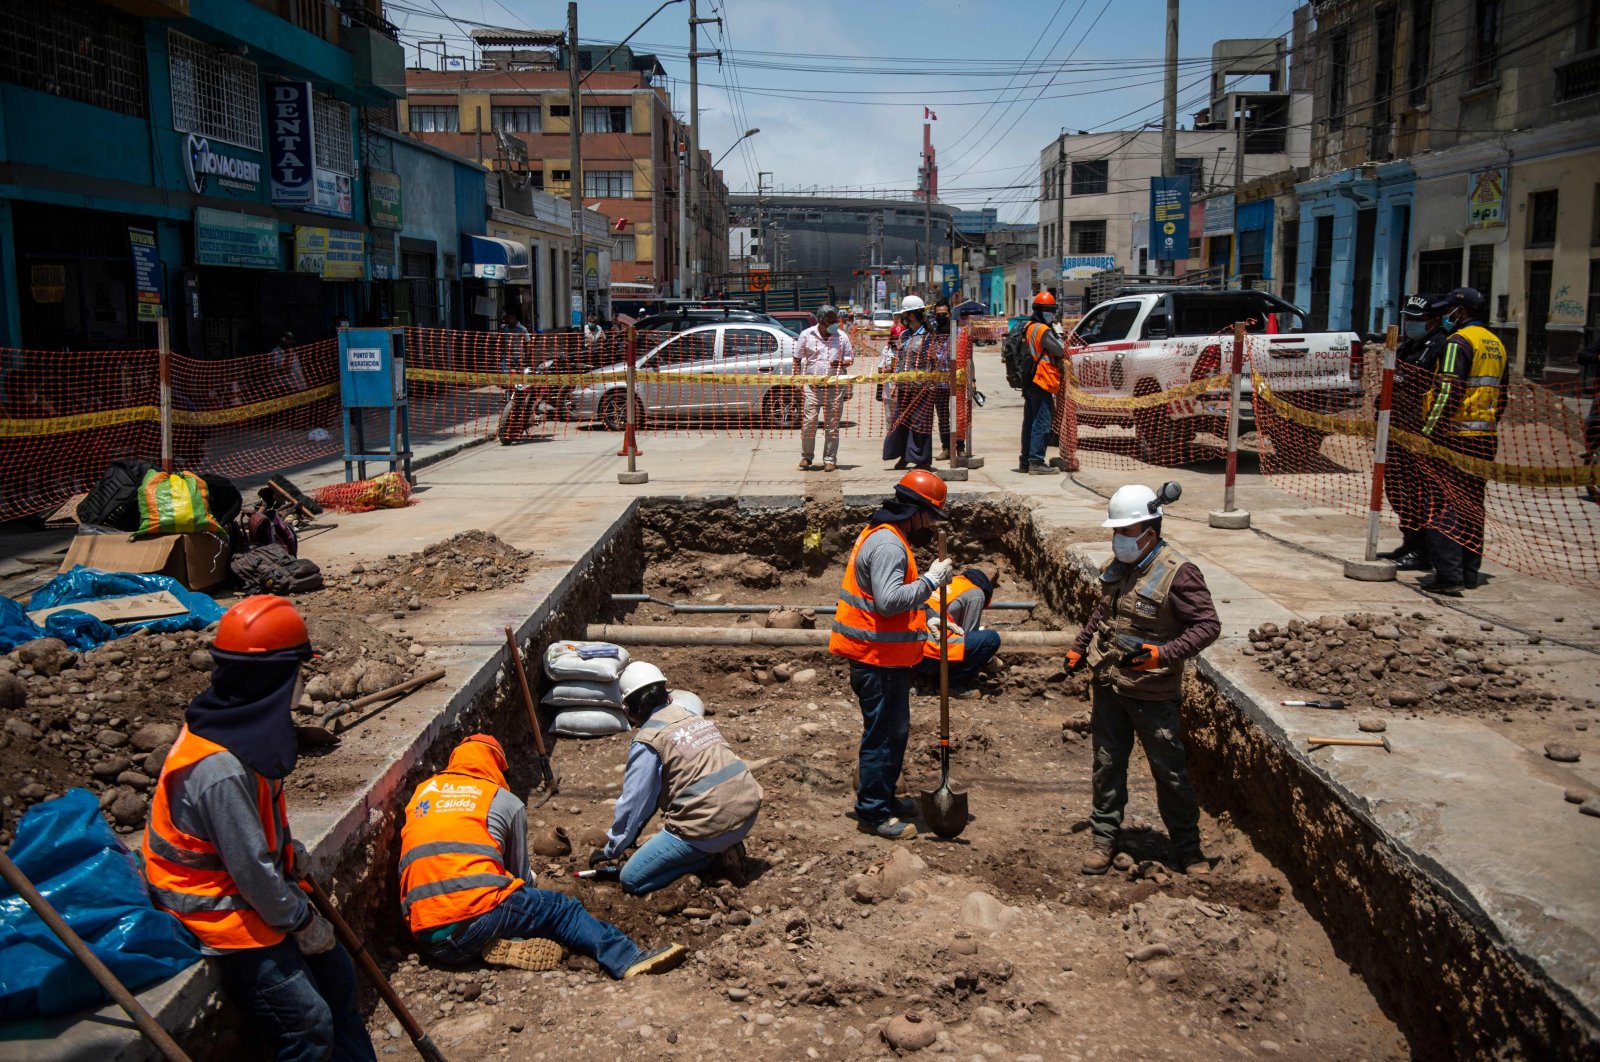 Specialists work around ancient vessels found by a crew laying a natural gas pipe under a street in Lima, Peru, Nov. 4, 2021. (AFP Photo)